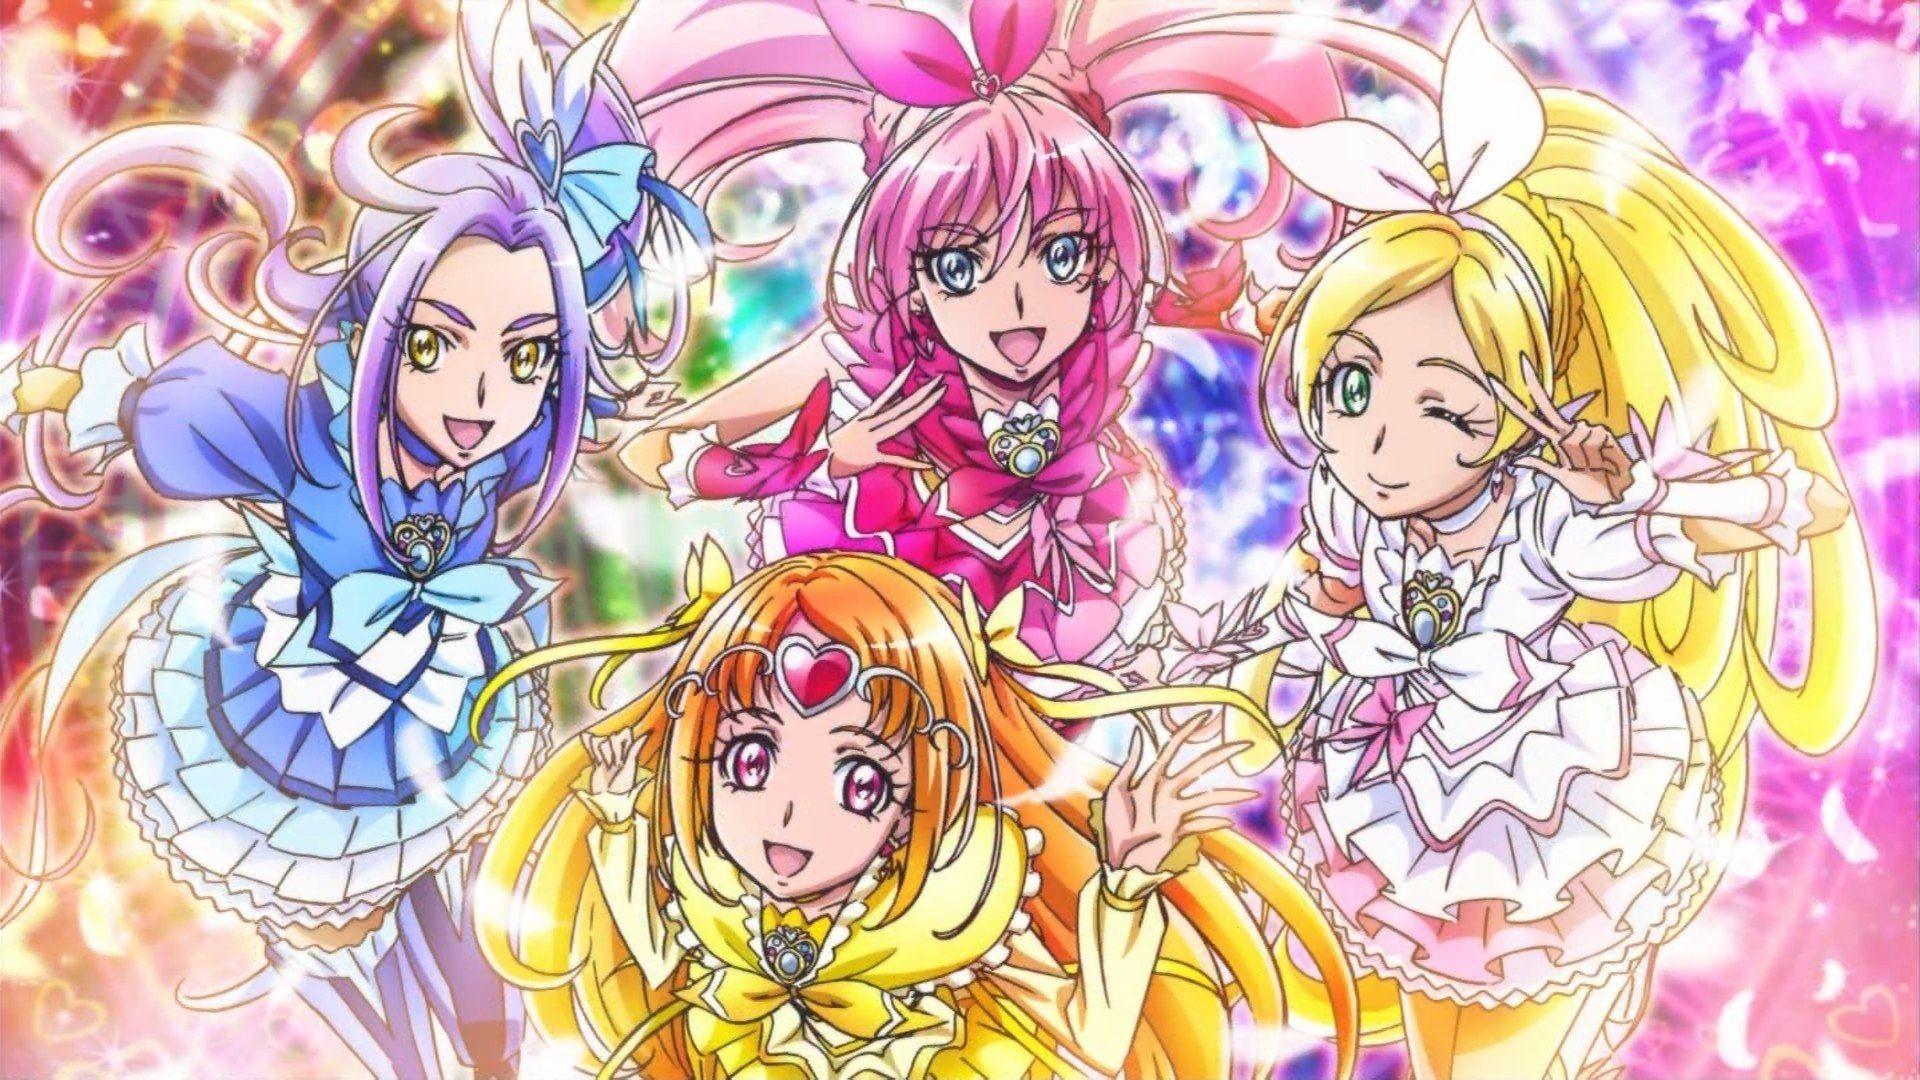 Pretty Cure Wallpapers Wallpaper Cave